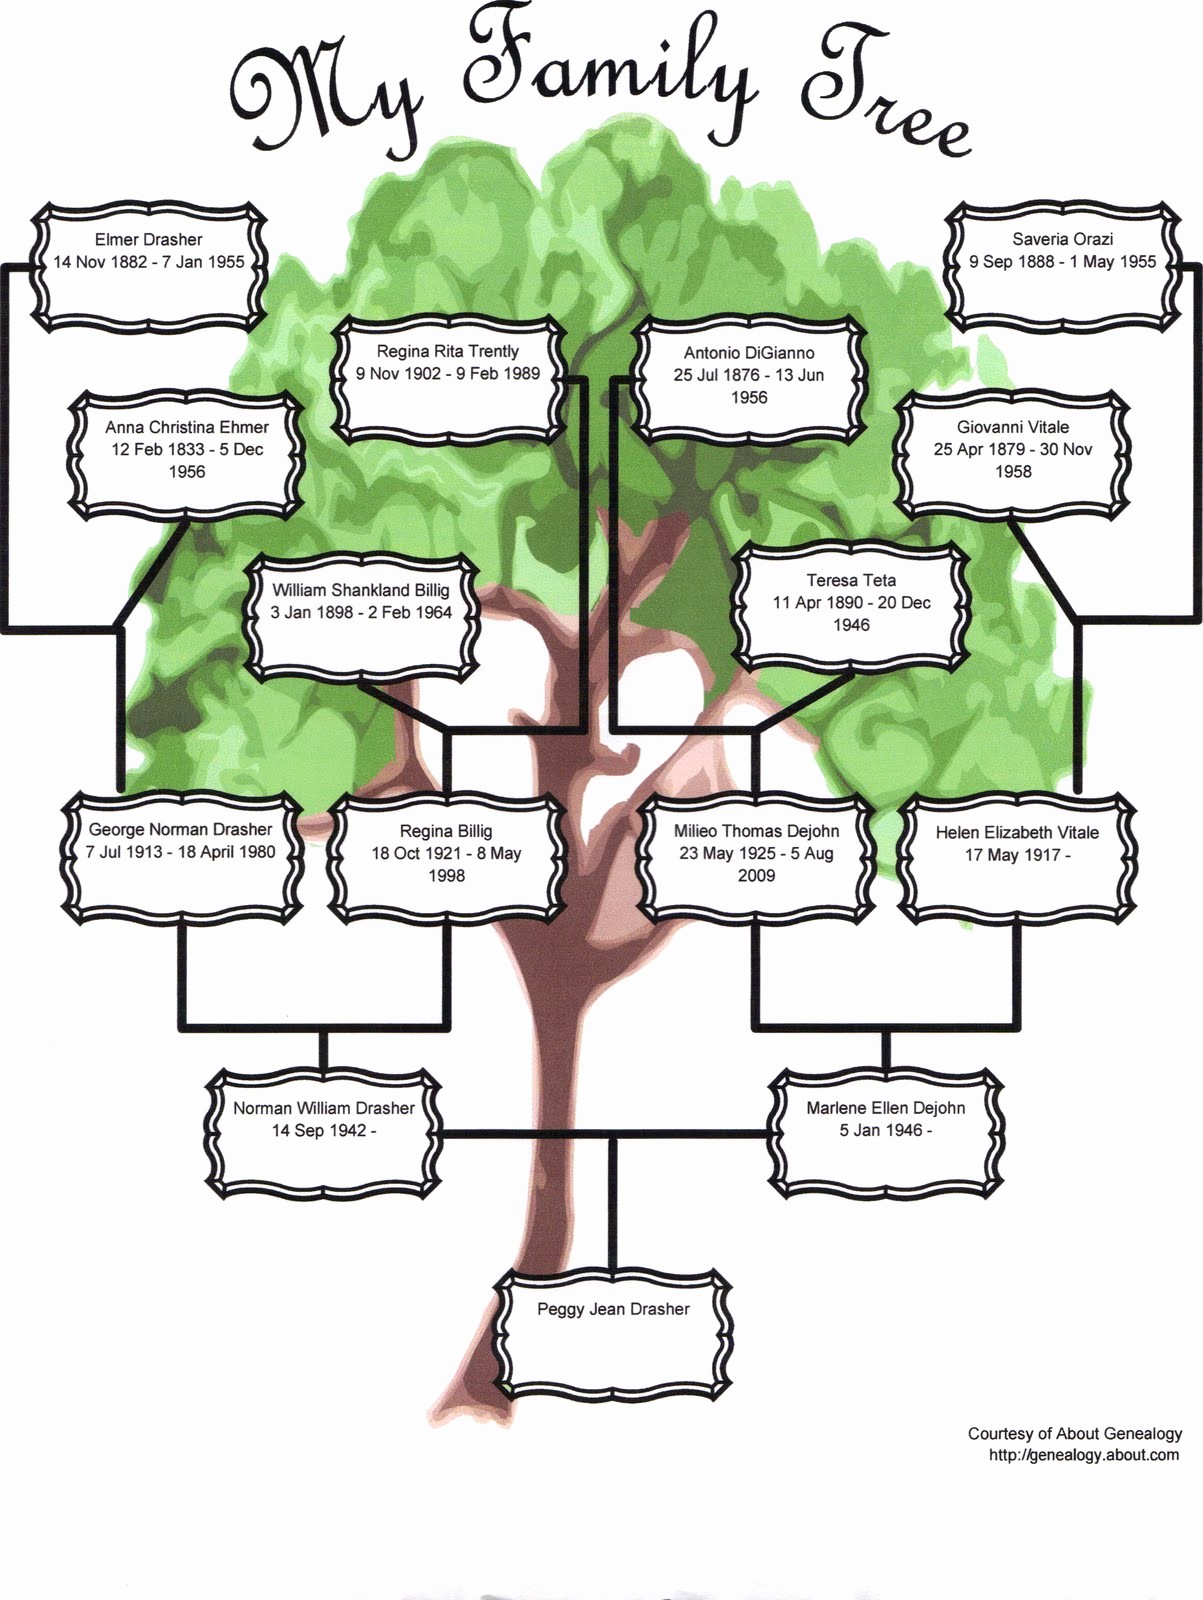 Family Tree Template 5 Generations Luxury Family Tree Template Family Tree Template Three Generation